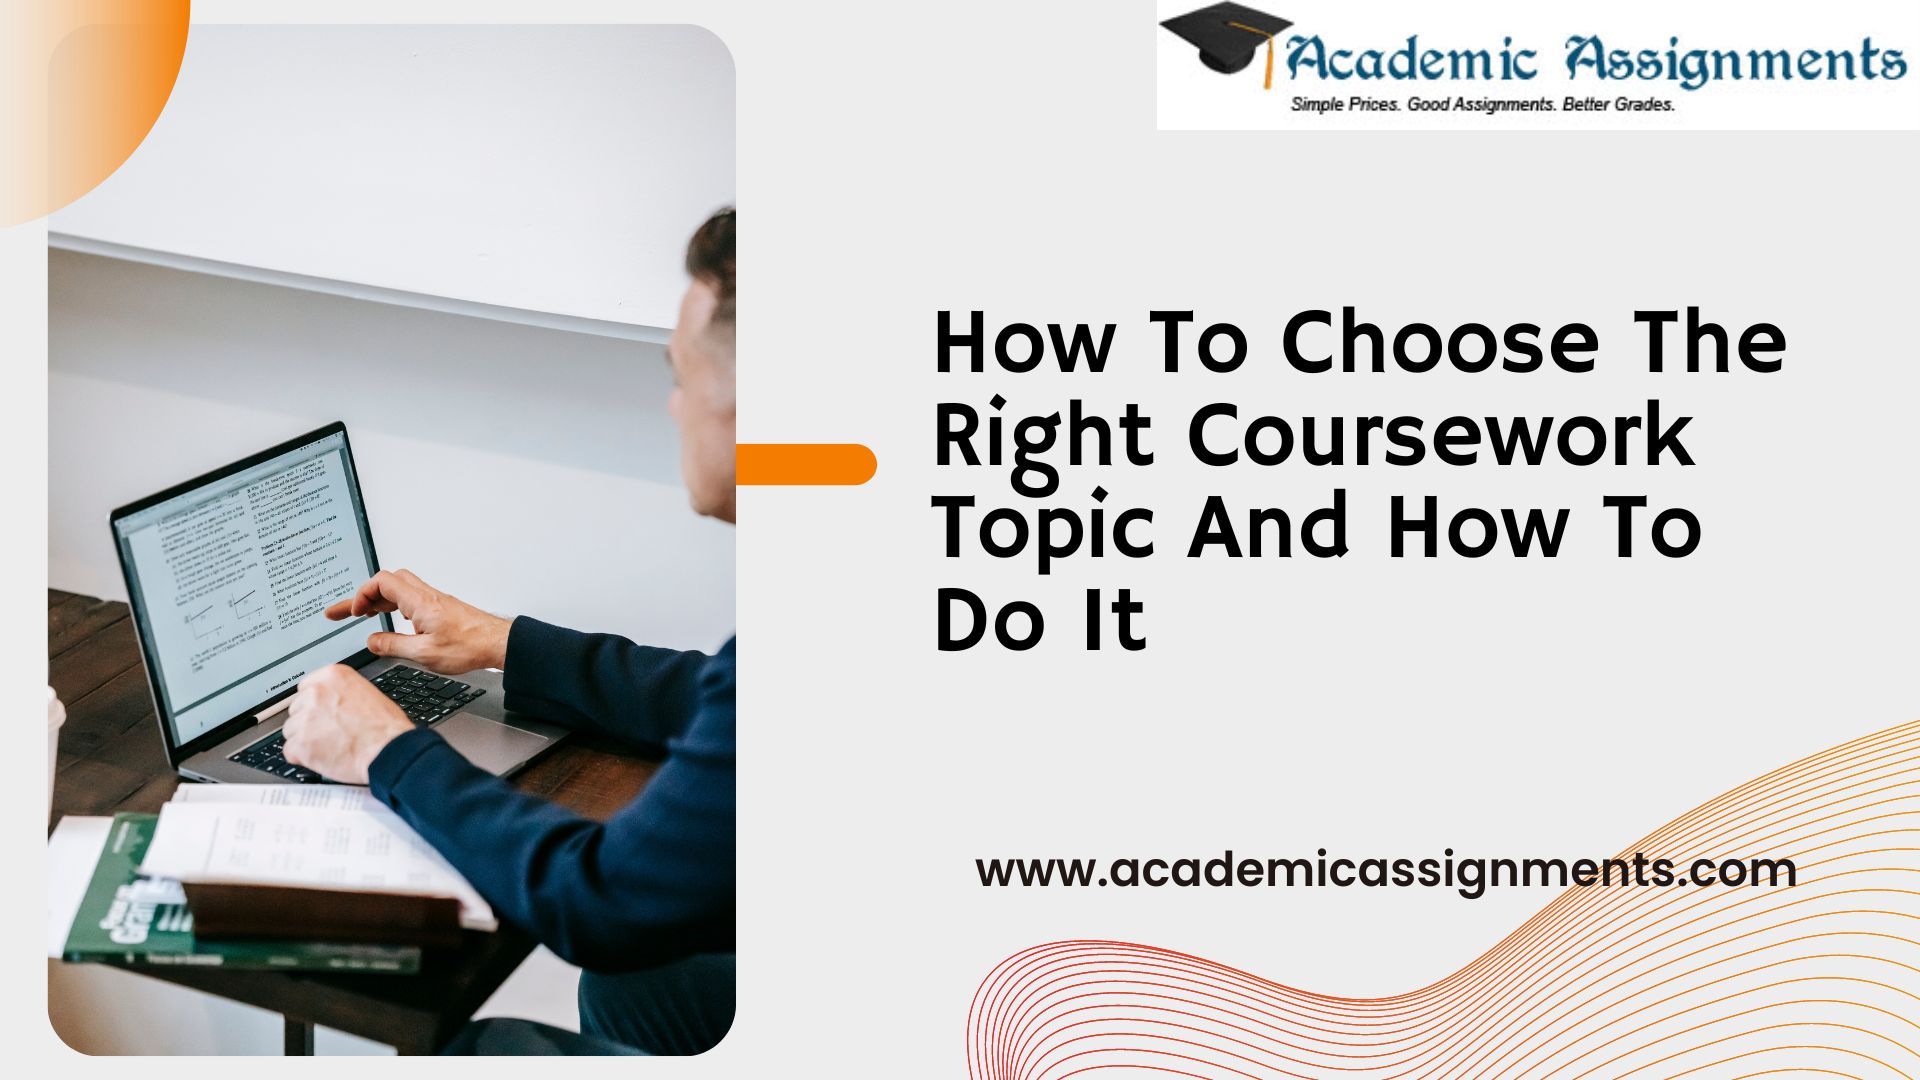 How To Choose The Right Coursework Topic